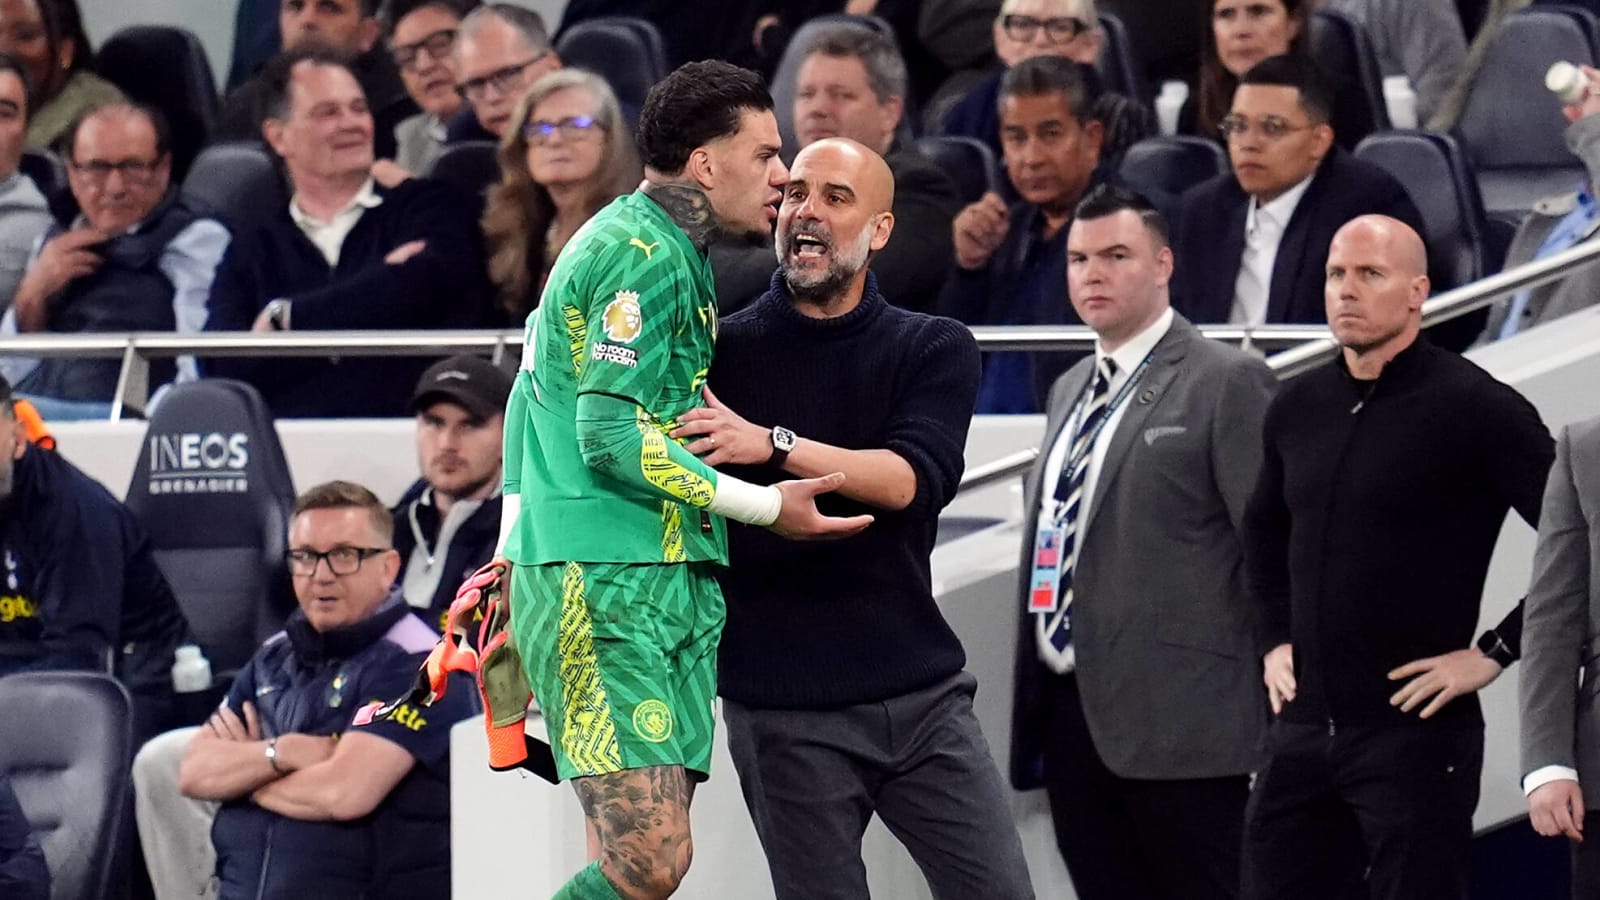 An update on the injury status on Ederson has emerged